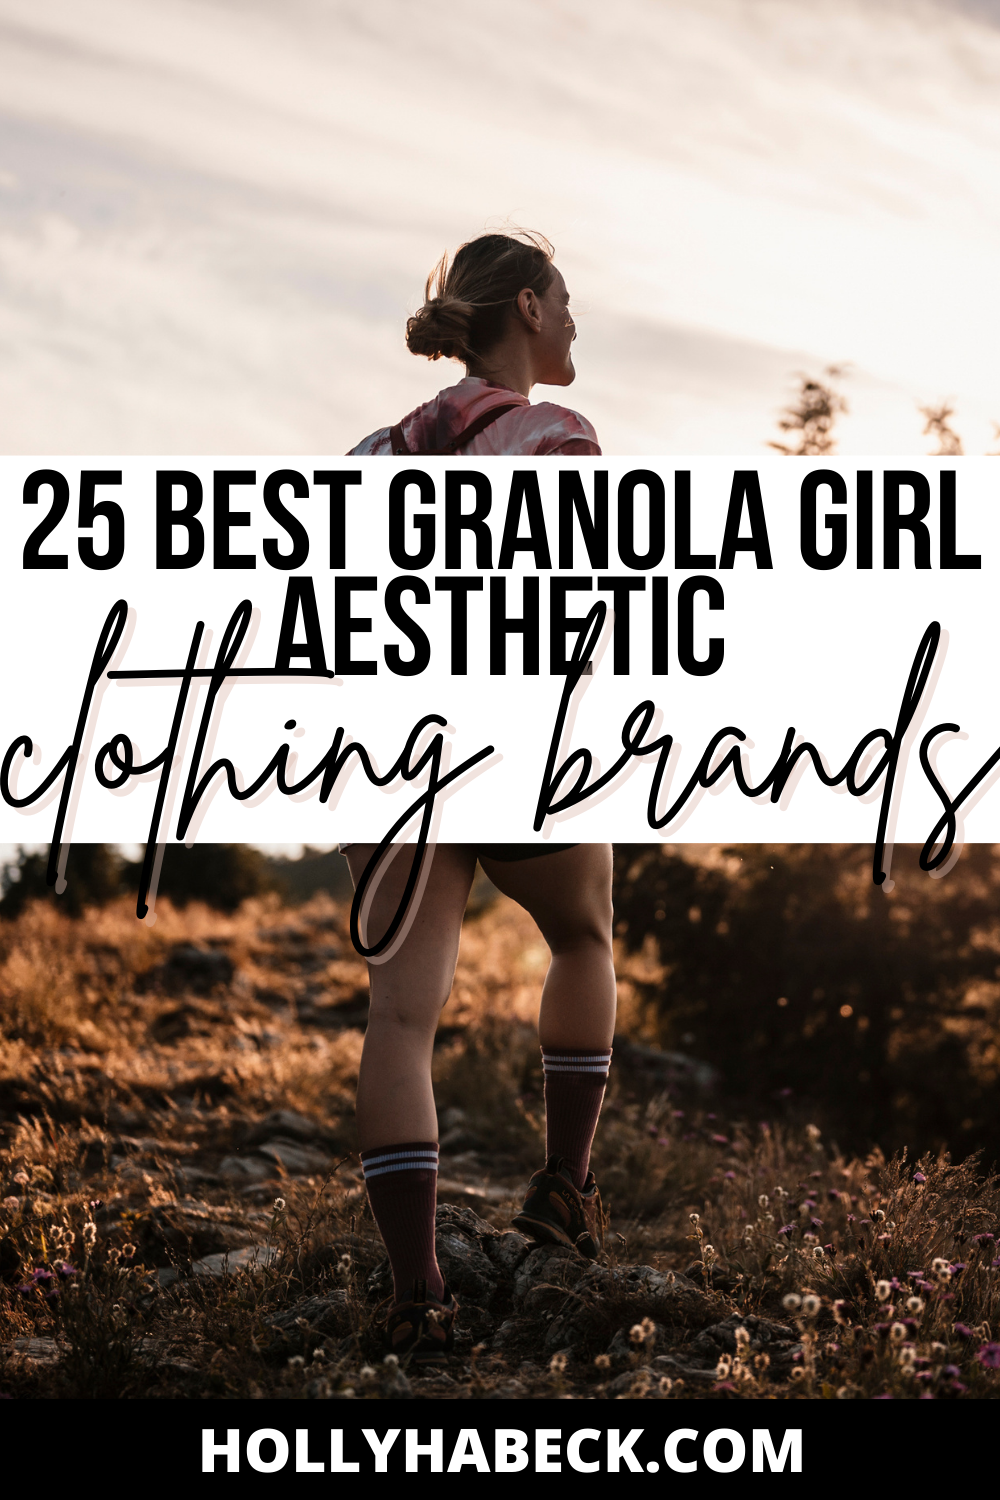 Granola Girl Aesthetic: 25 Granola Clothing Brands to Shop Now